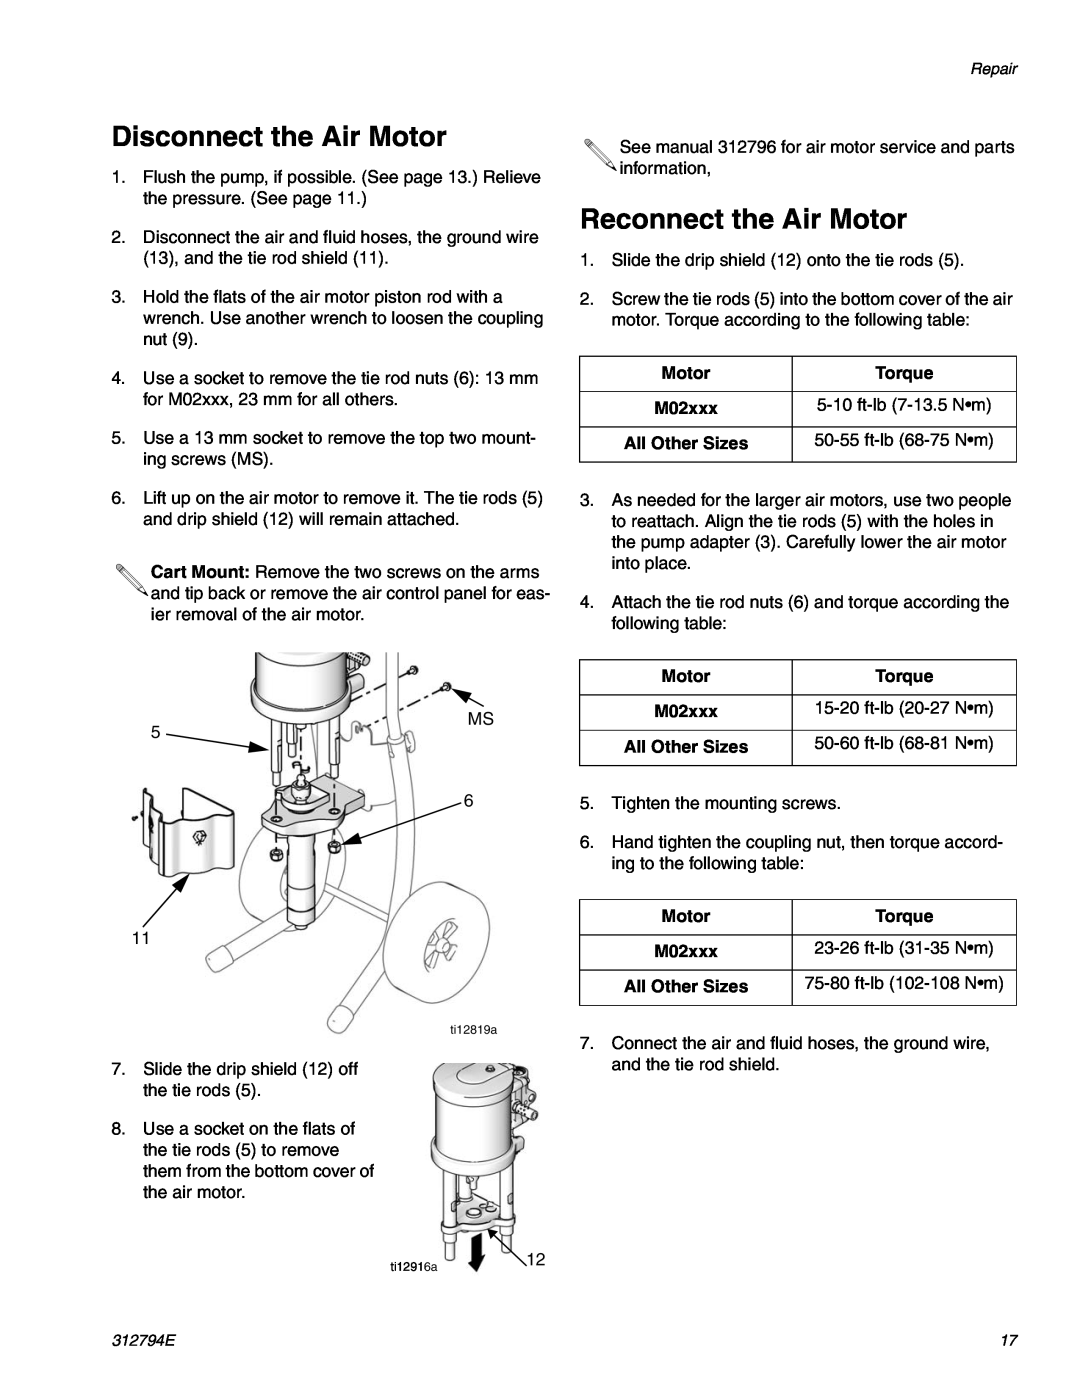 Graco 312794E important safety instructions Disconnect the Air Motor, Reconnect the Air Motor, Torque, All Other Sizes 